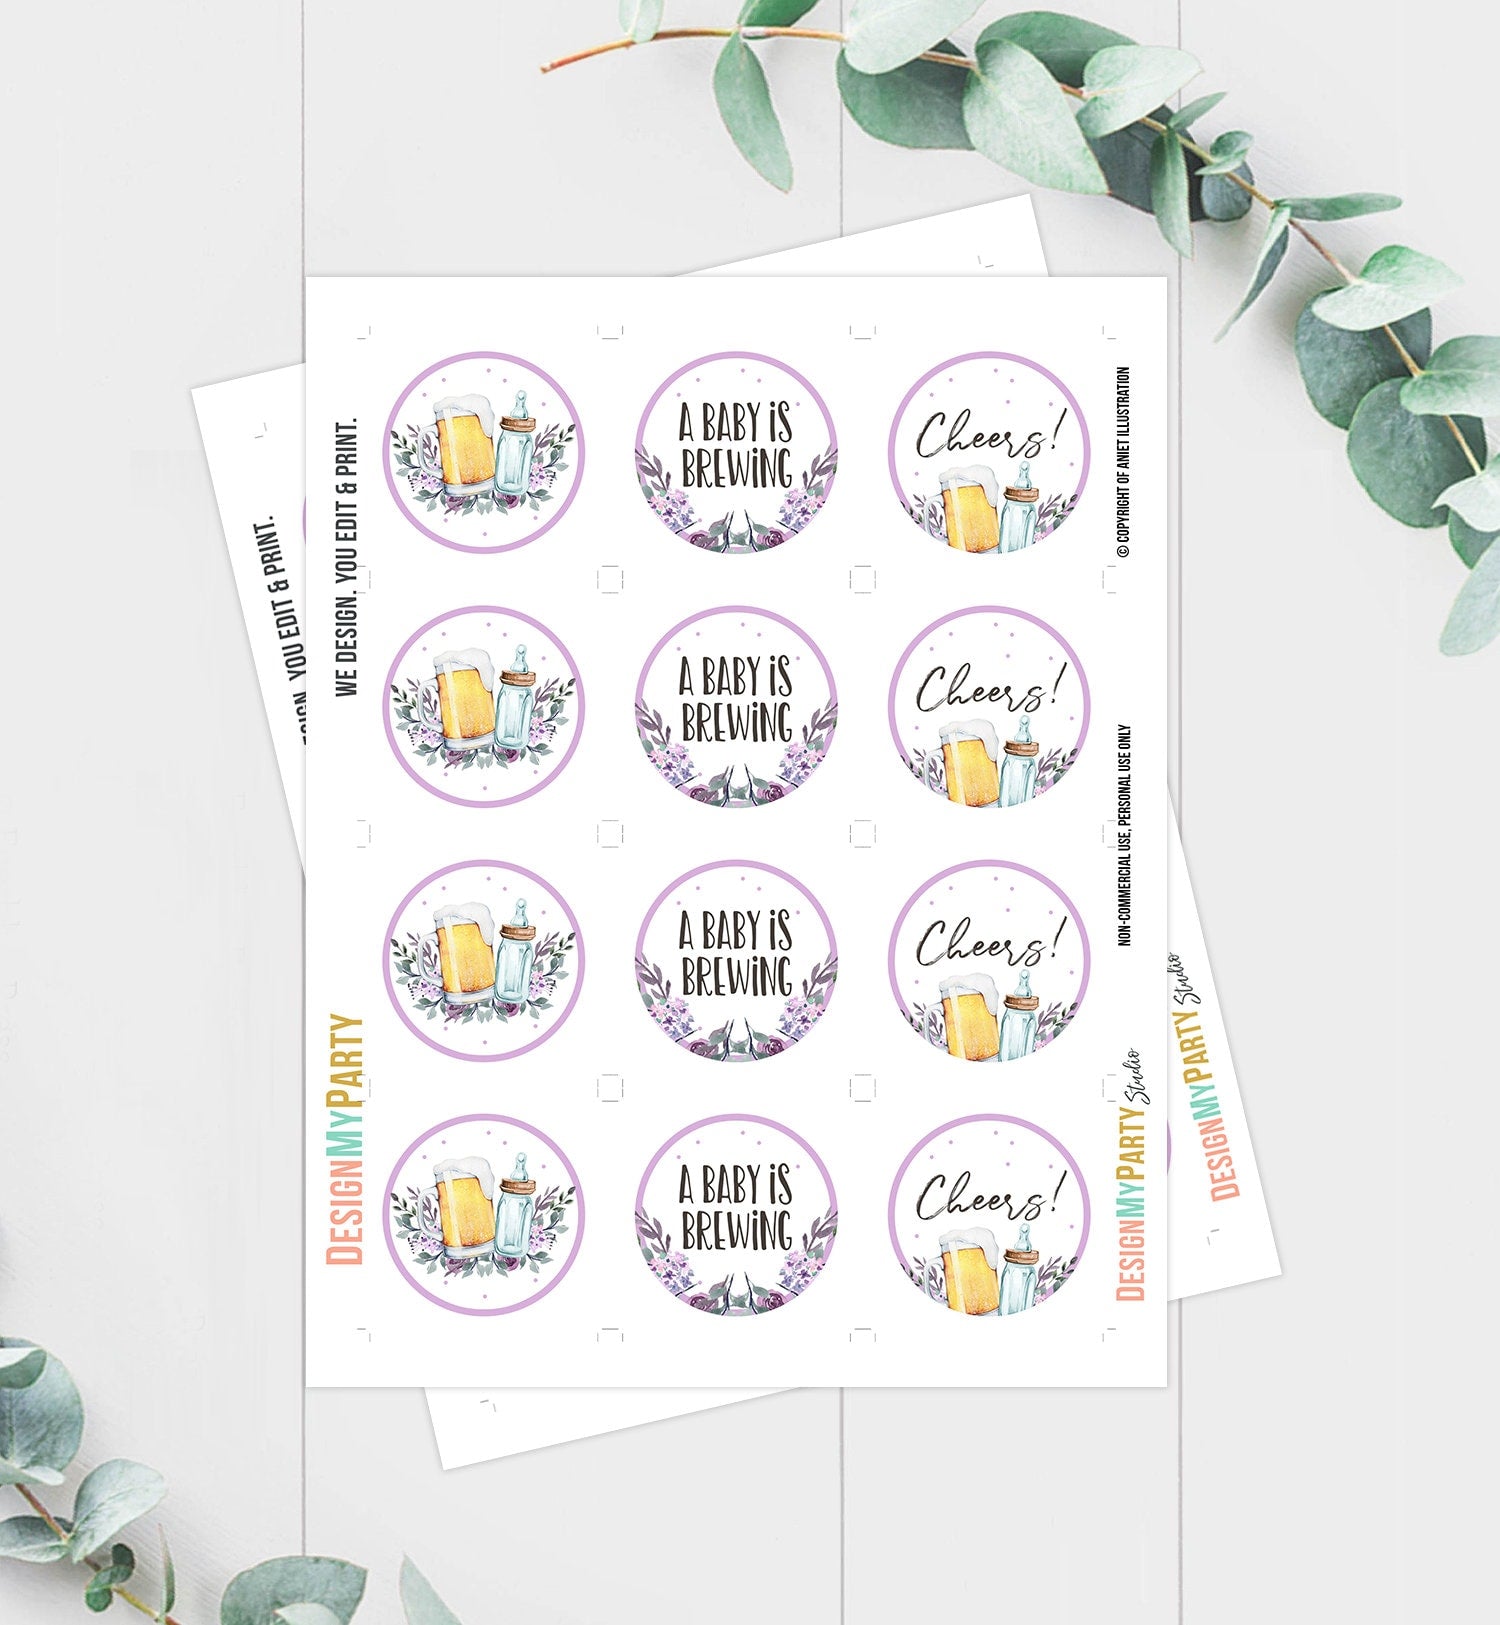 A Baby is Brewing Cupcake Toppers Favor Tags Bottle and Beers Baby Shower Cheers Party Decor Shower Greenery Purple Digital PRINTABLE 0190